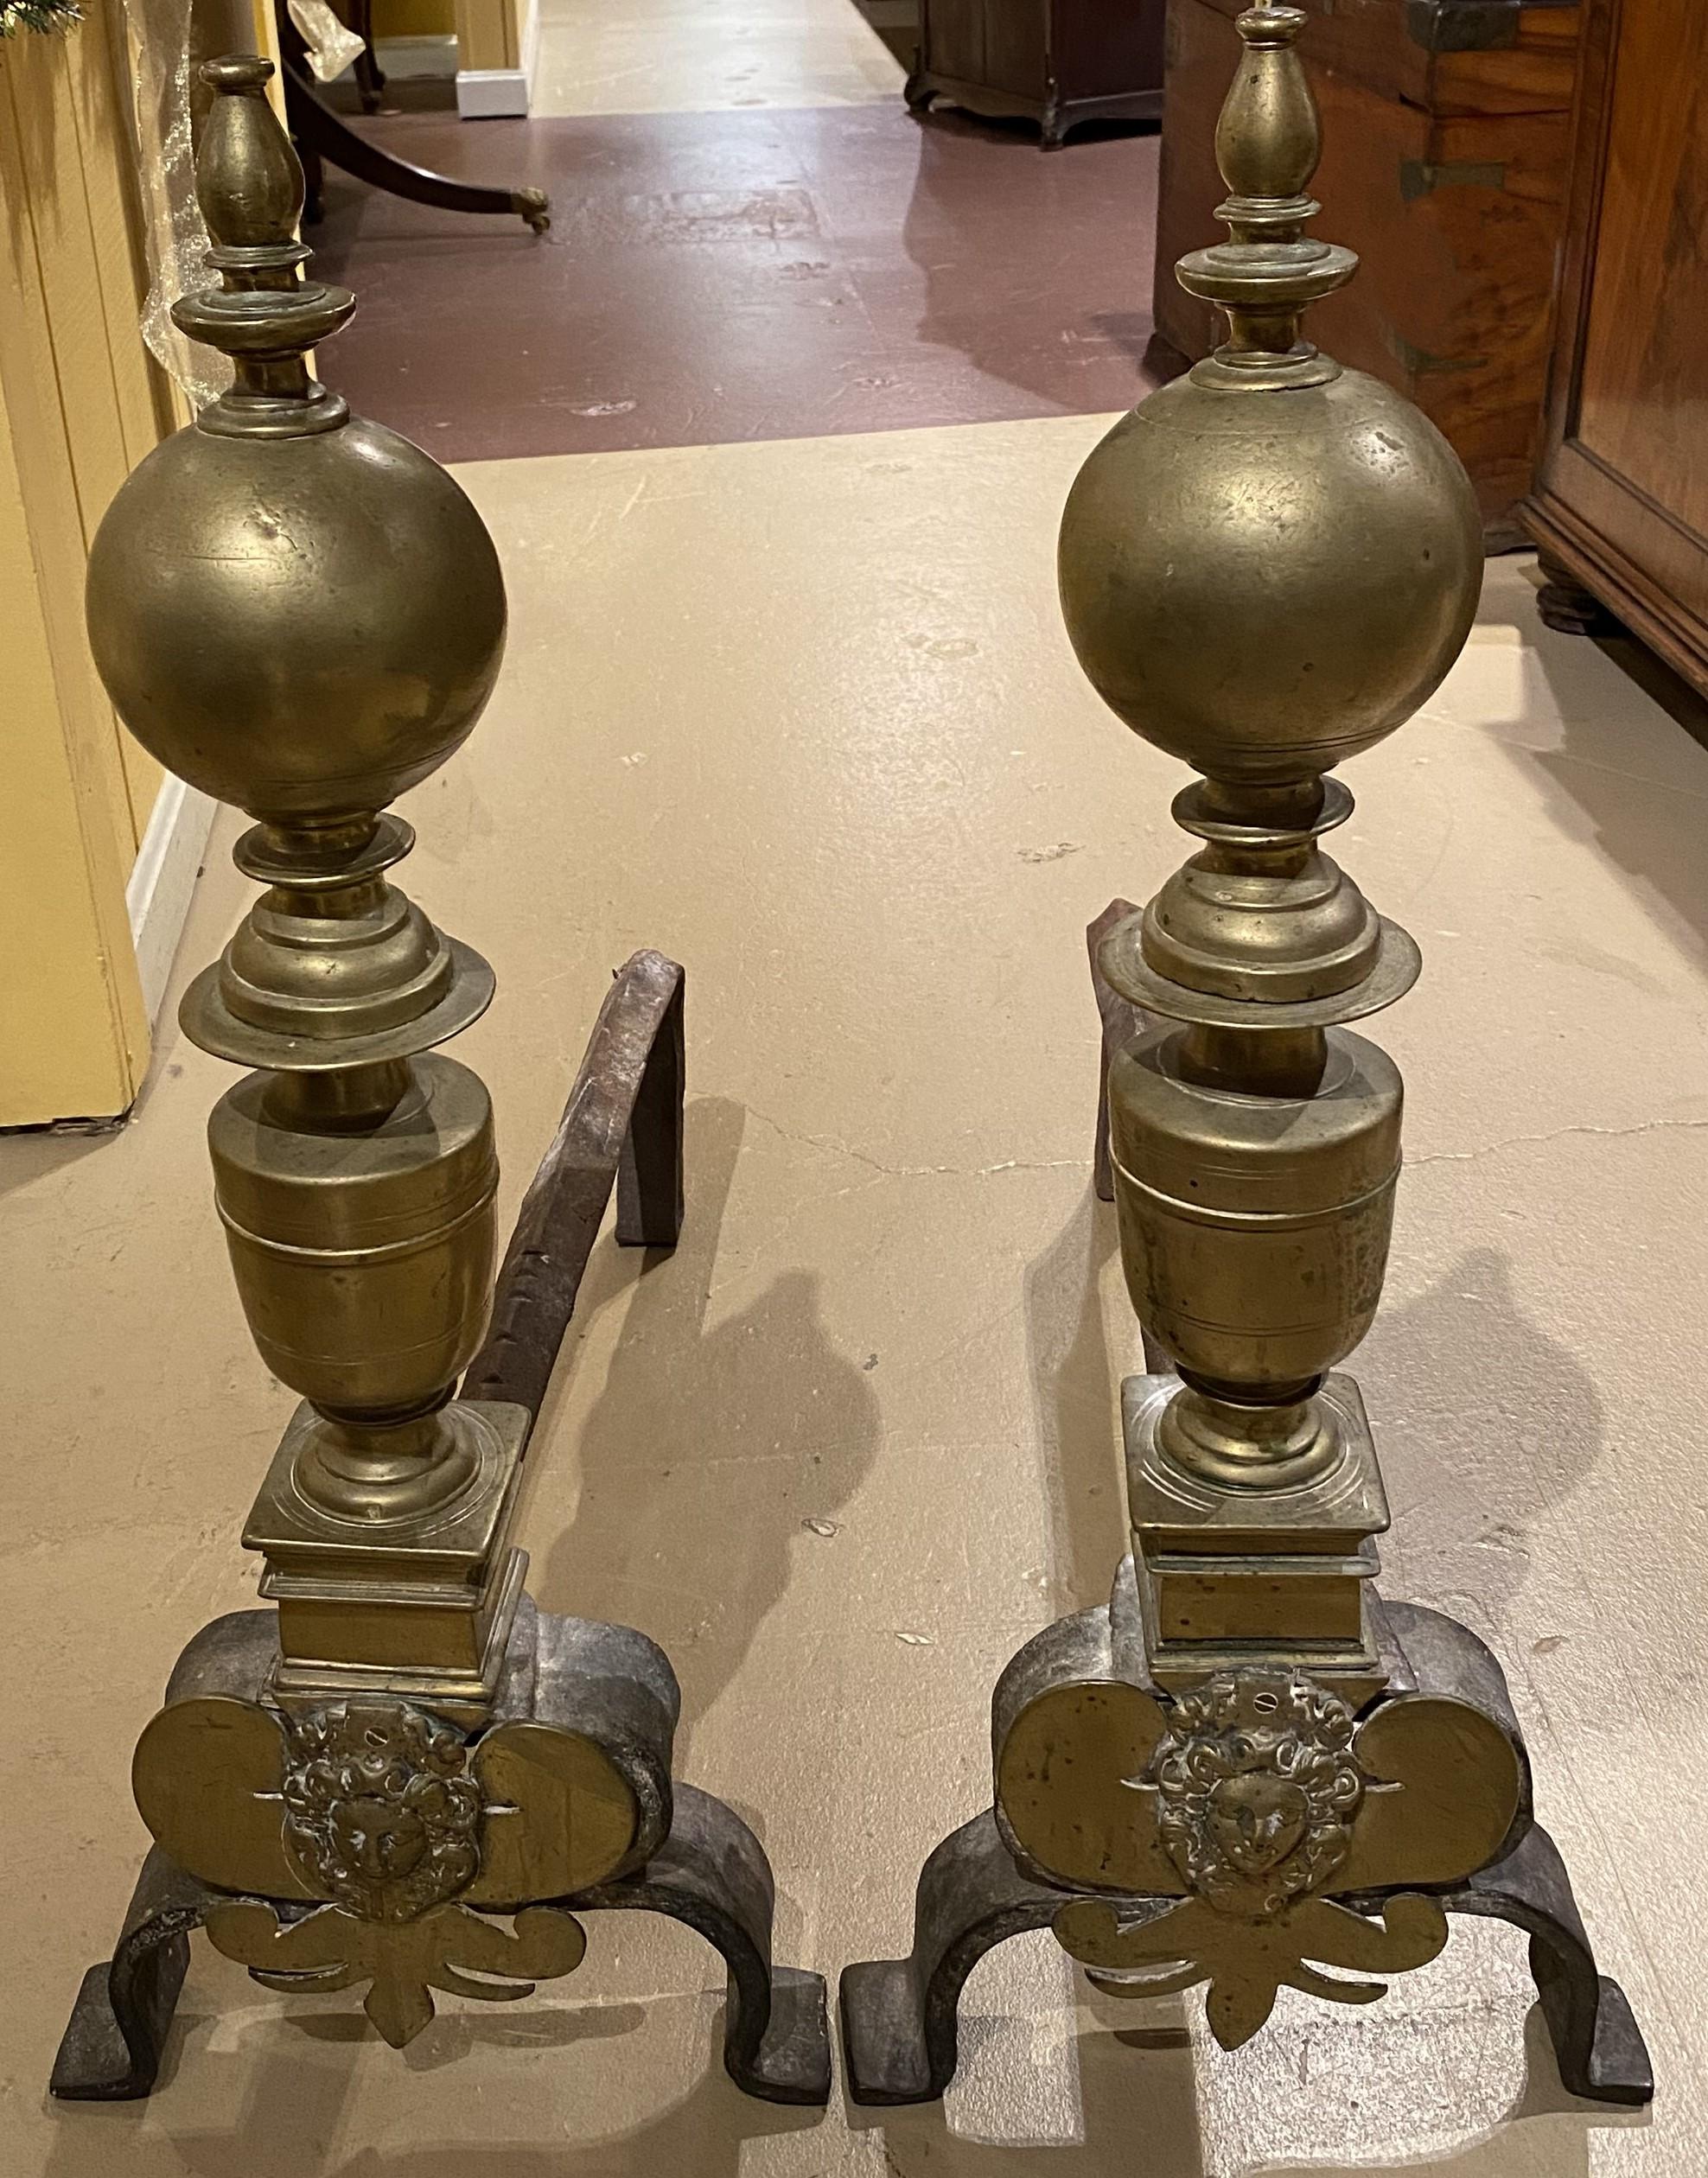 A fine pair of heavy Baroque style brass ball andirons with urn form stem and a face decoration on the bases. Probably 19th century Continental in origin, in very good condition, with minor dents, wear and light rust on the dogs, and great overall